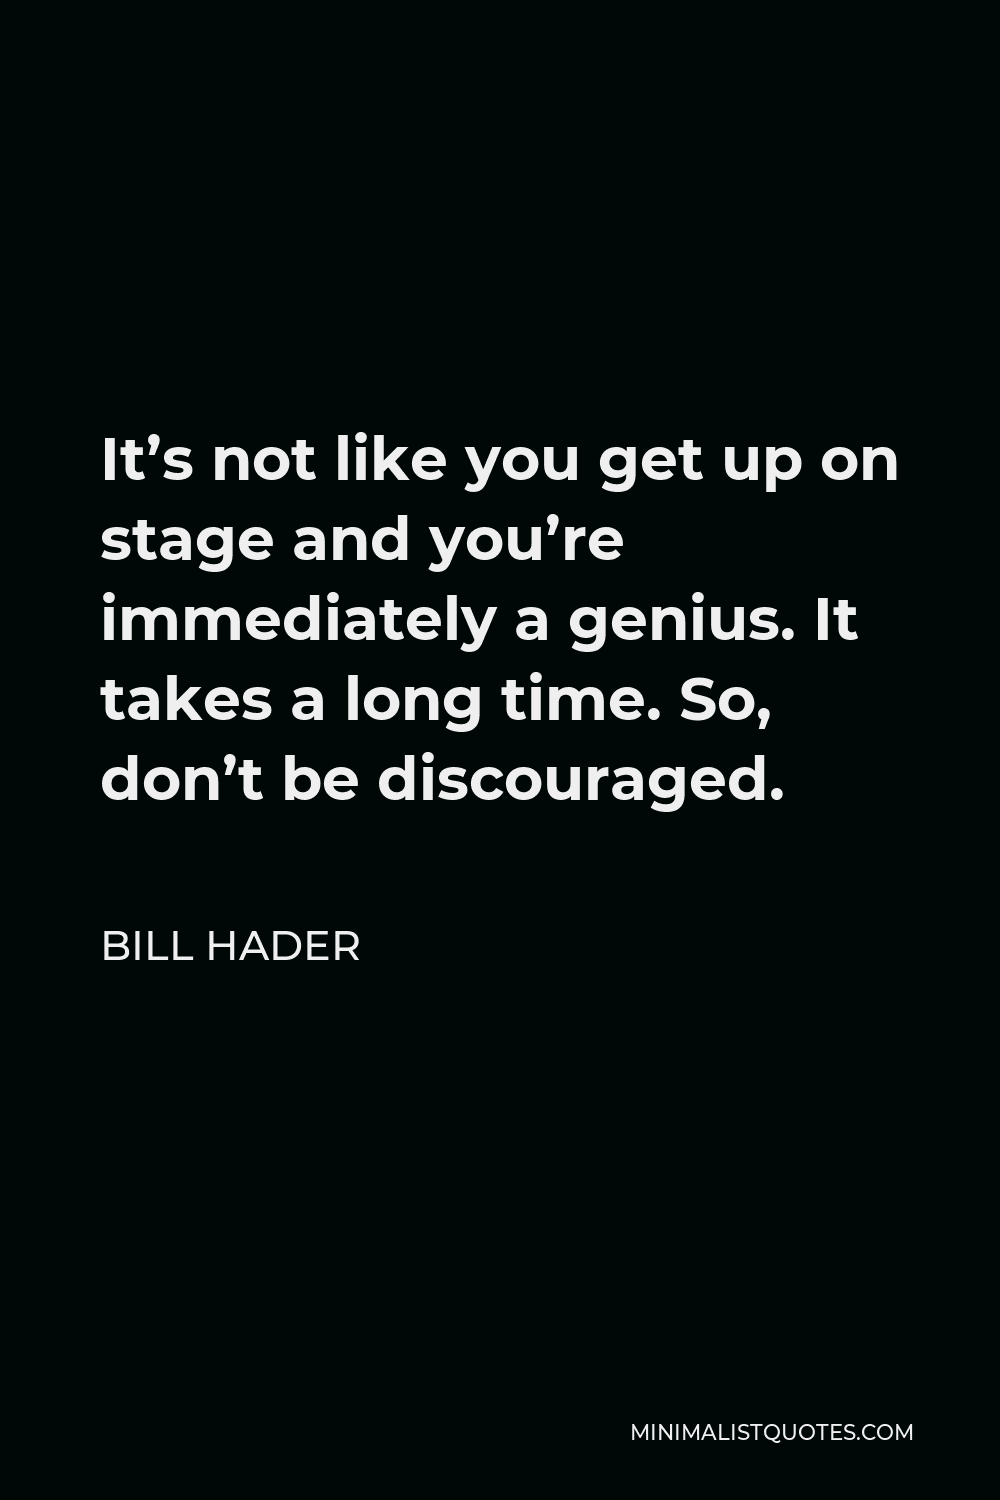 Bill Hader Quote - It’s not like you get up on stage and you’re immediately a genius. It takes a long time. So, don’t be discouraged.